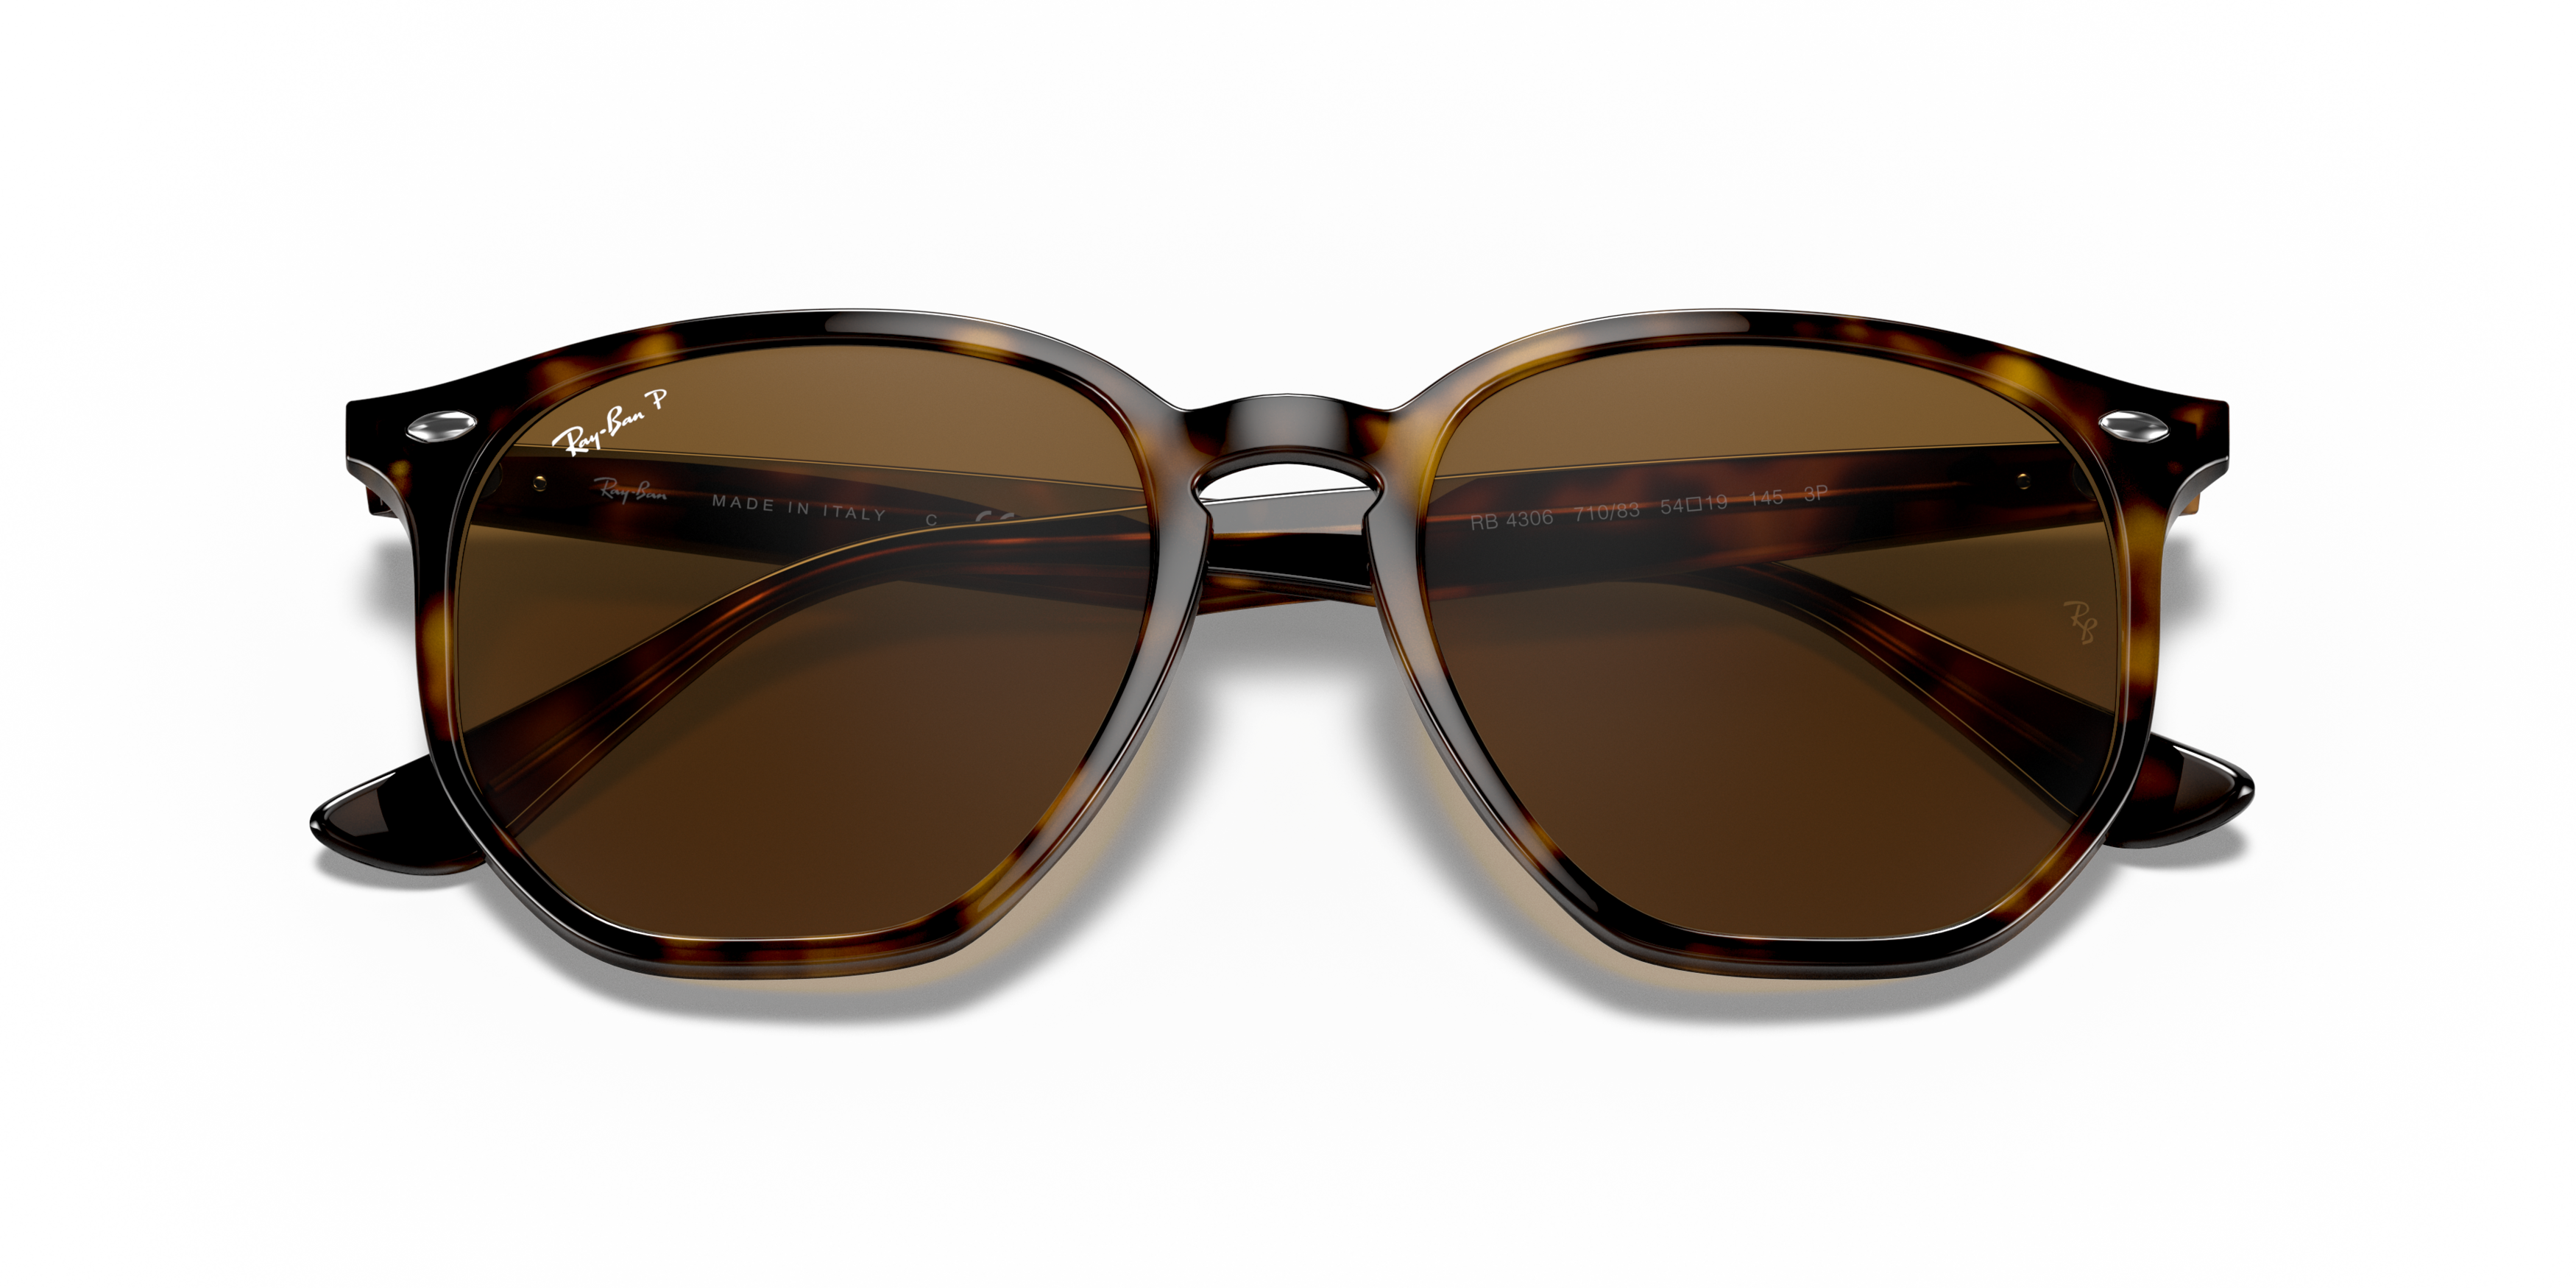 Folded Ray-Ban RB 4306 (710/83) Sunglasses Brown / Transparent, Tortoise Shell